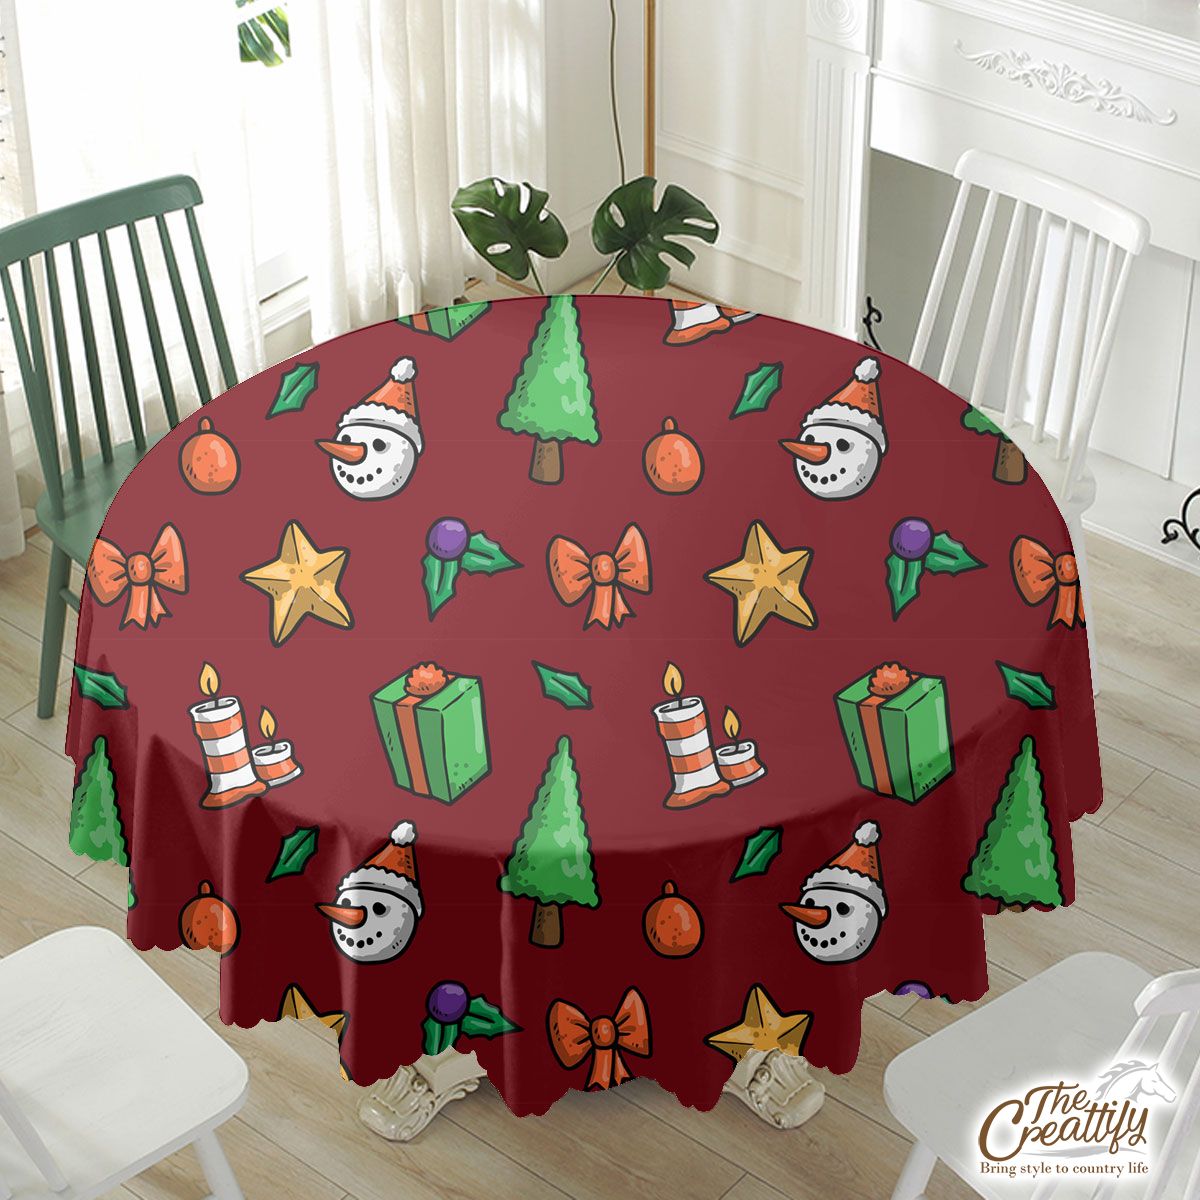 Christmas Gifts, Candles, Pine Tree And Snowman FaceWith Santa Hat Red Pattern Waterproof Tablecloth